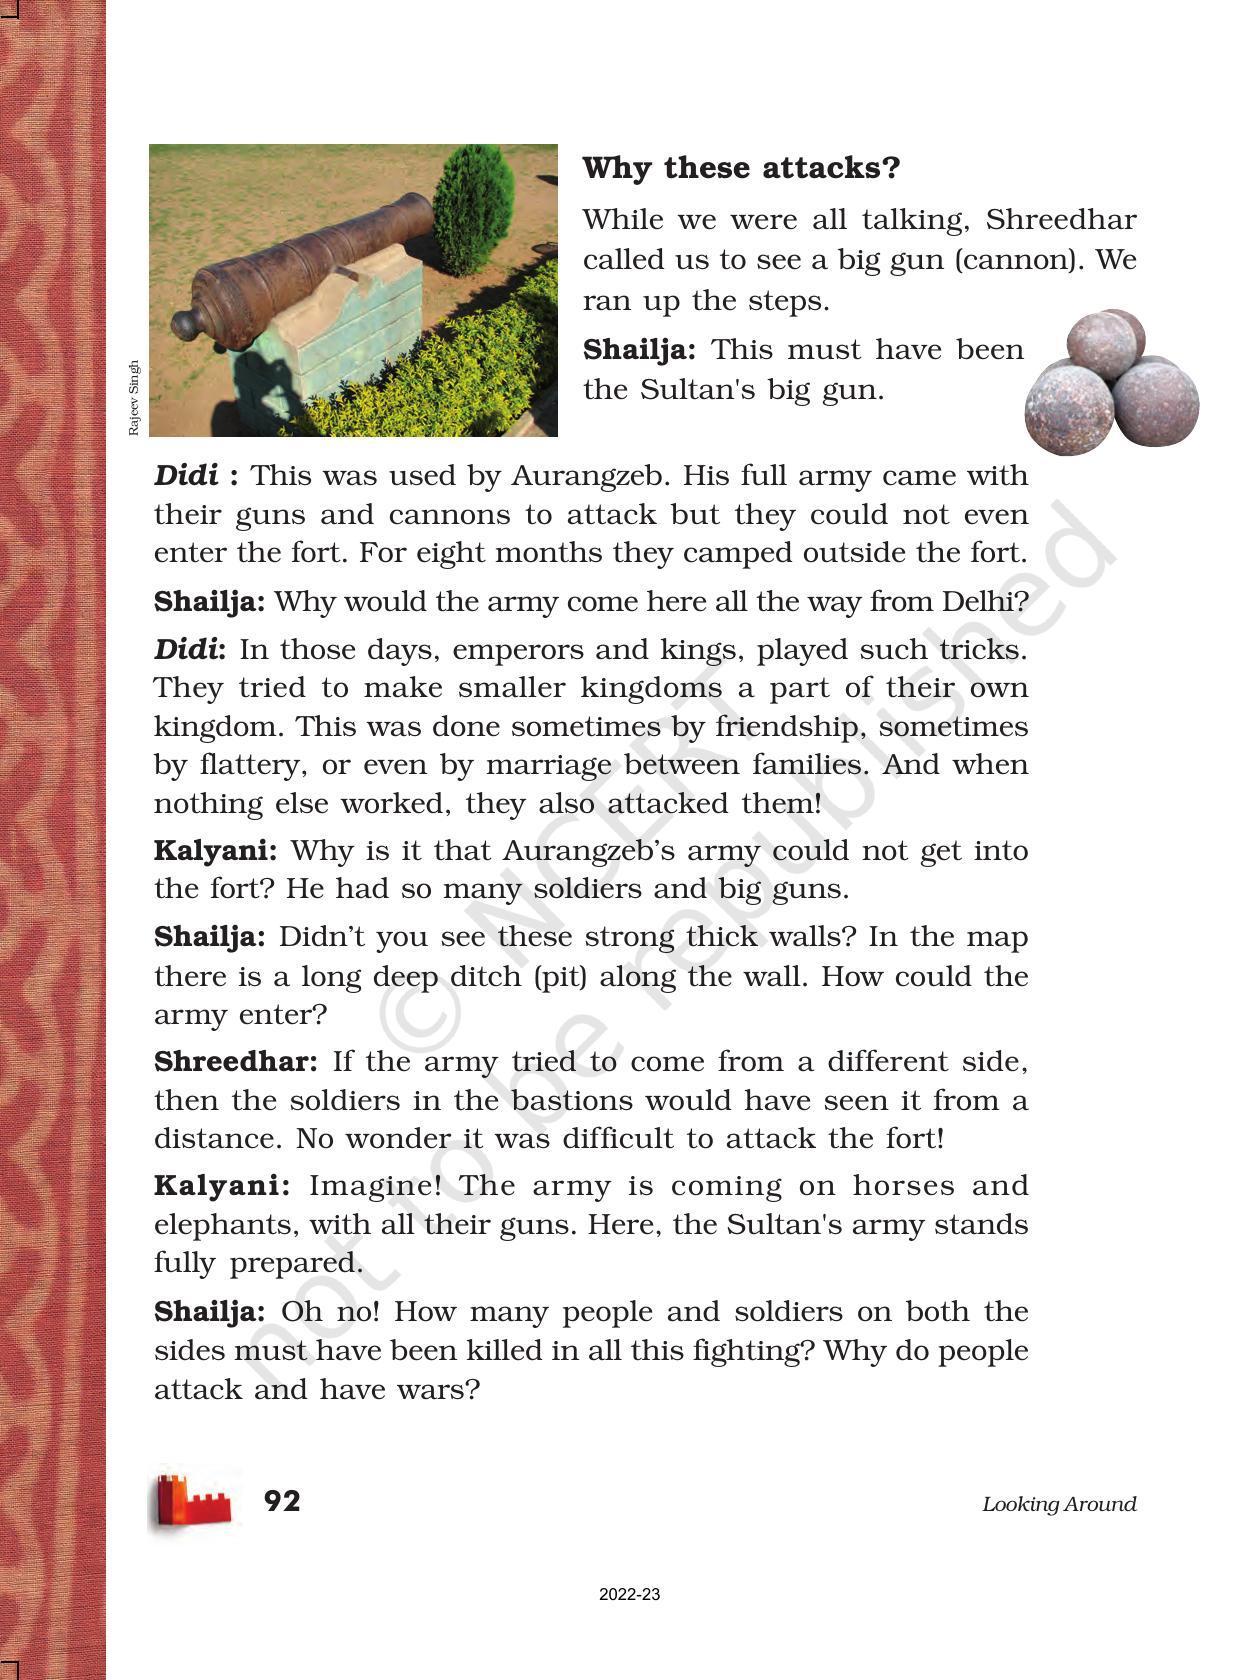 NCERT Book for Class 5 EVS Chapter 10 Walls Tell Stories - Page 6